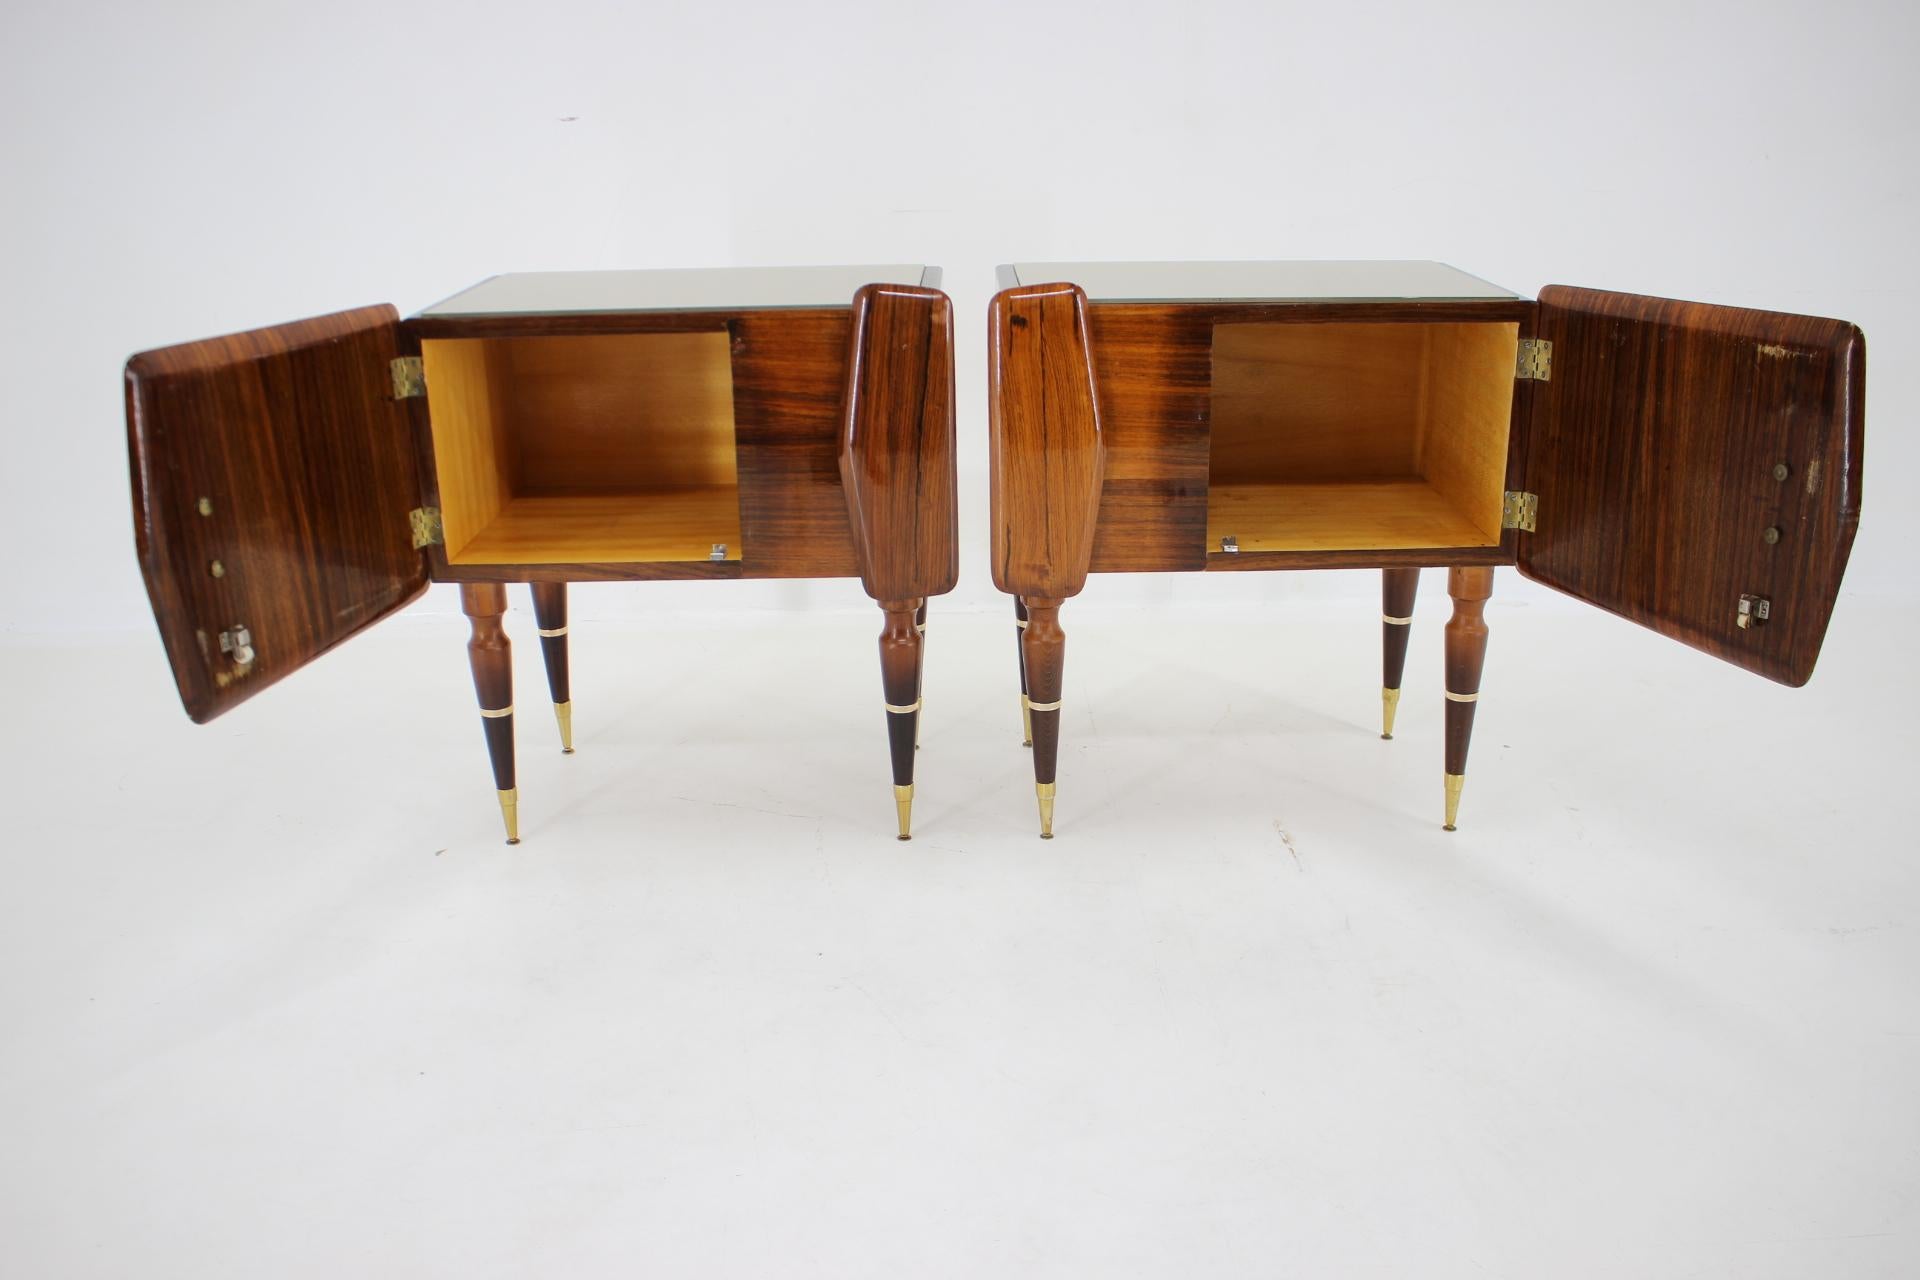 1960s Pair of Sculptural Wooden Bedside Tables, Italy For Sale 6